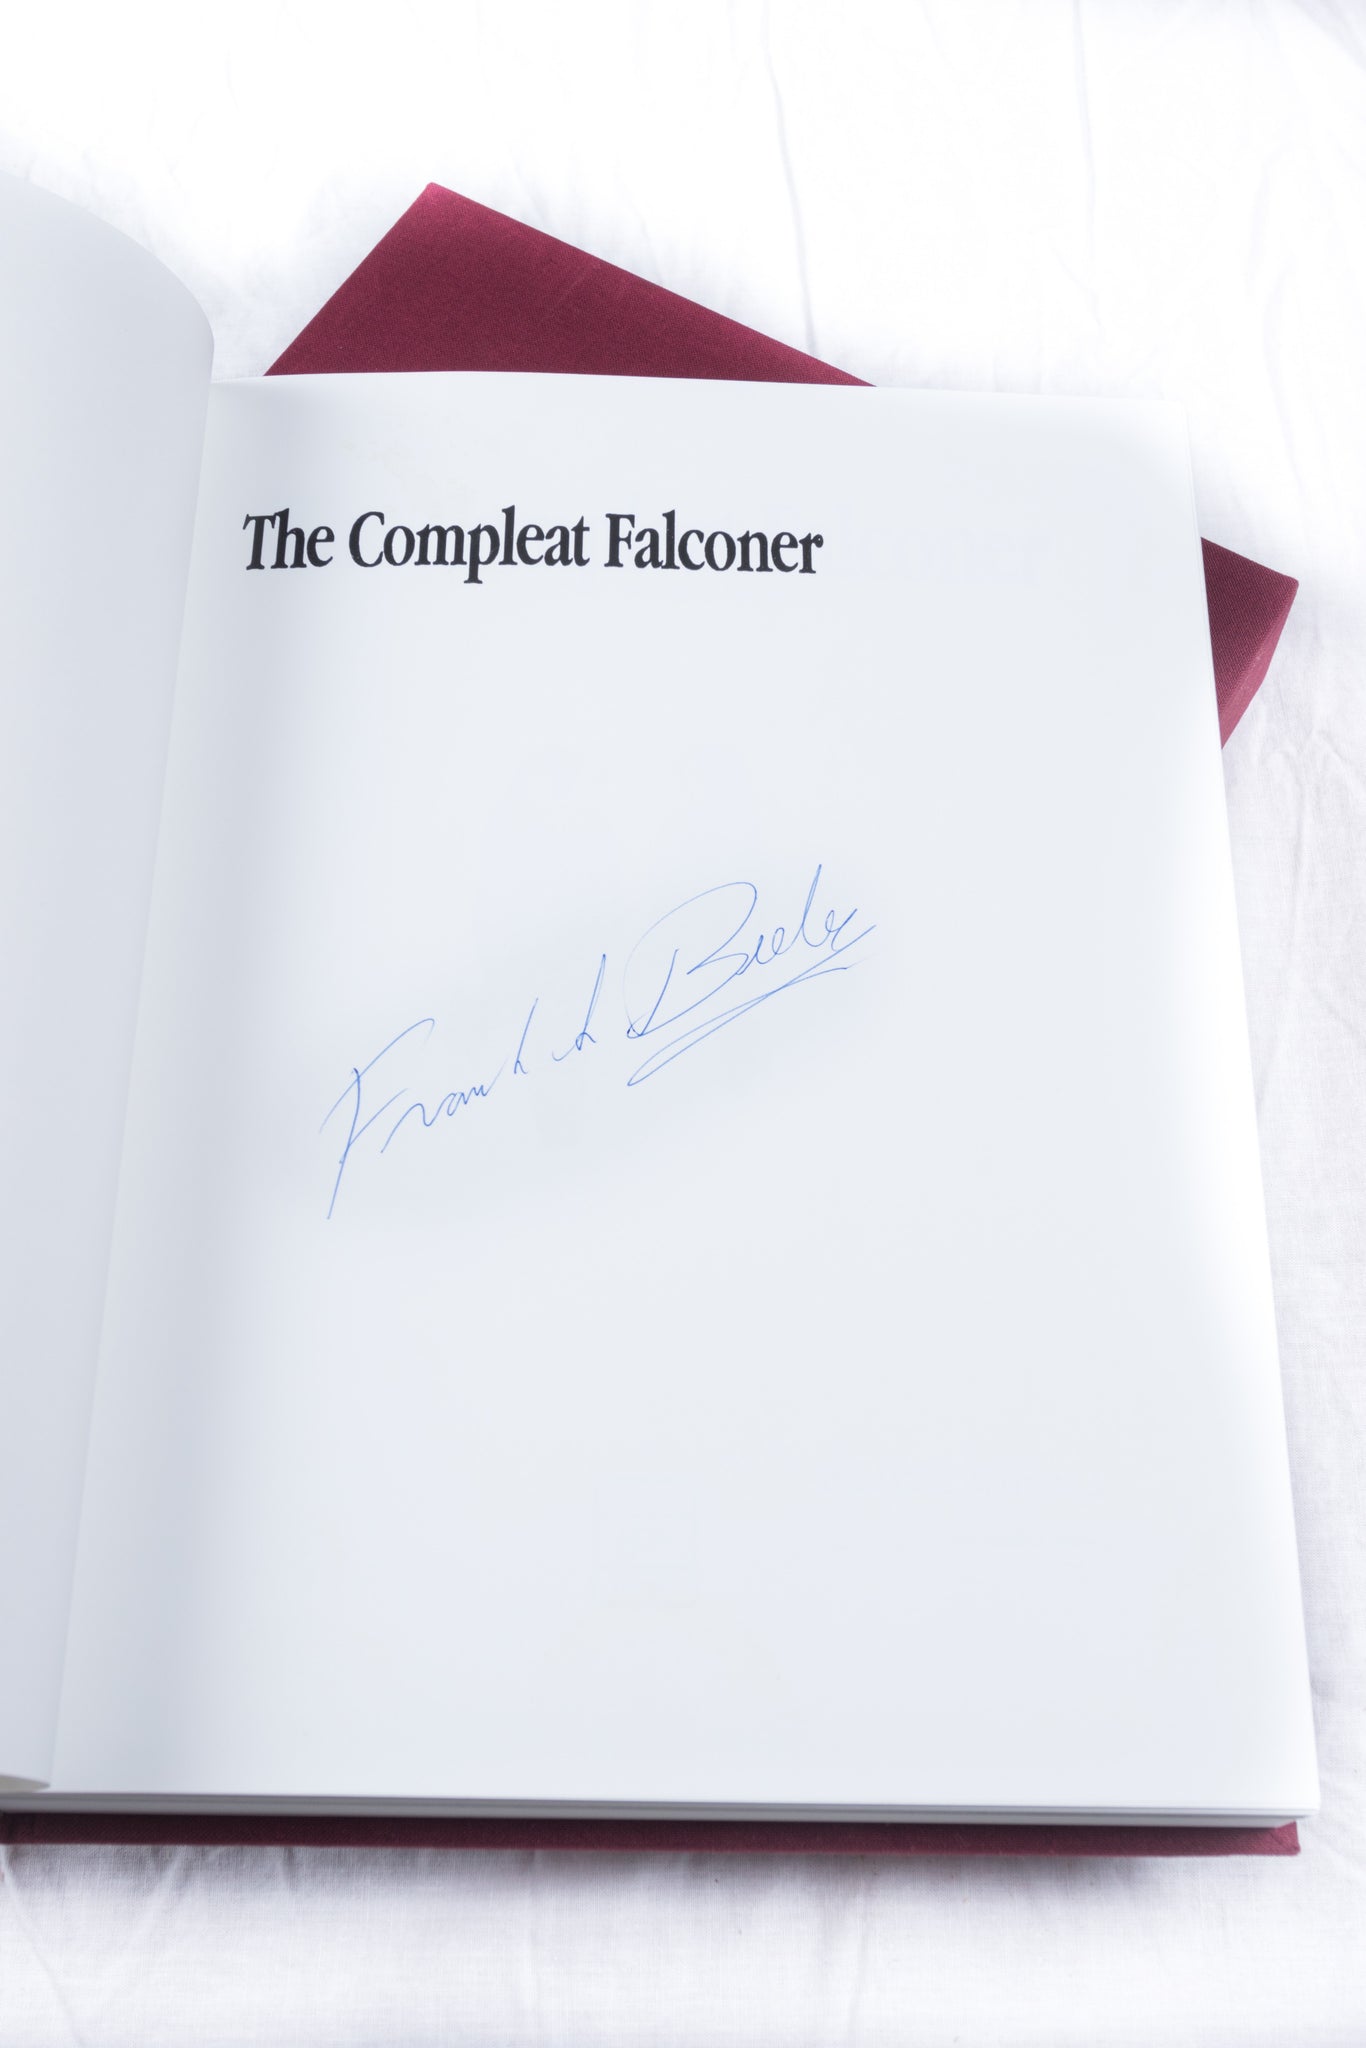 Compleat Falconer